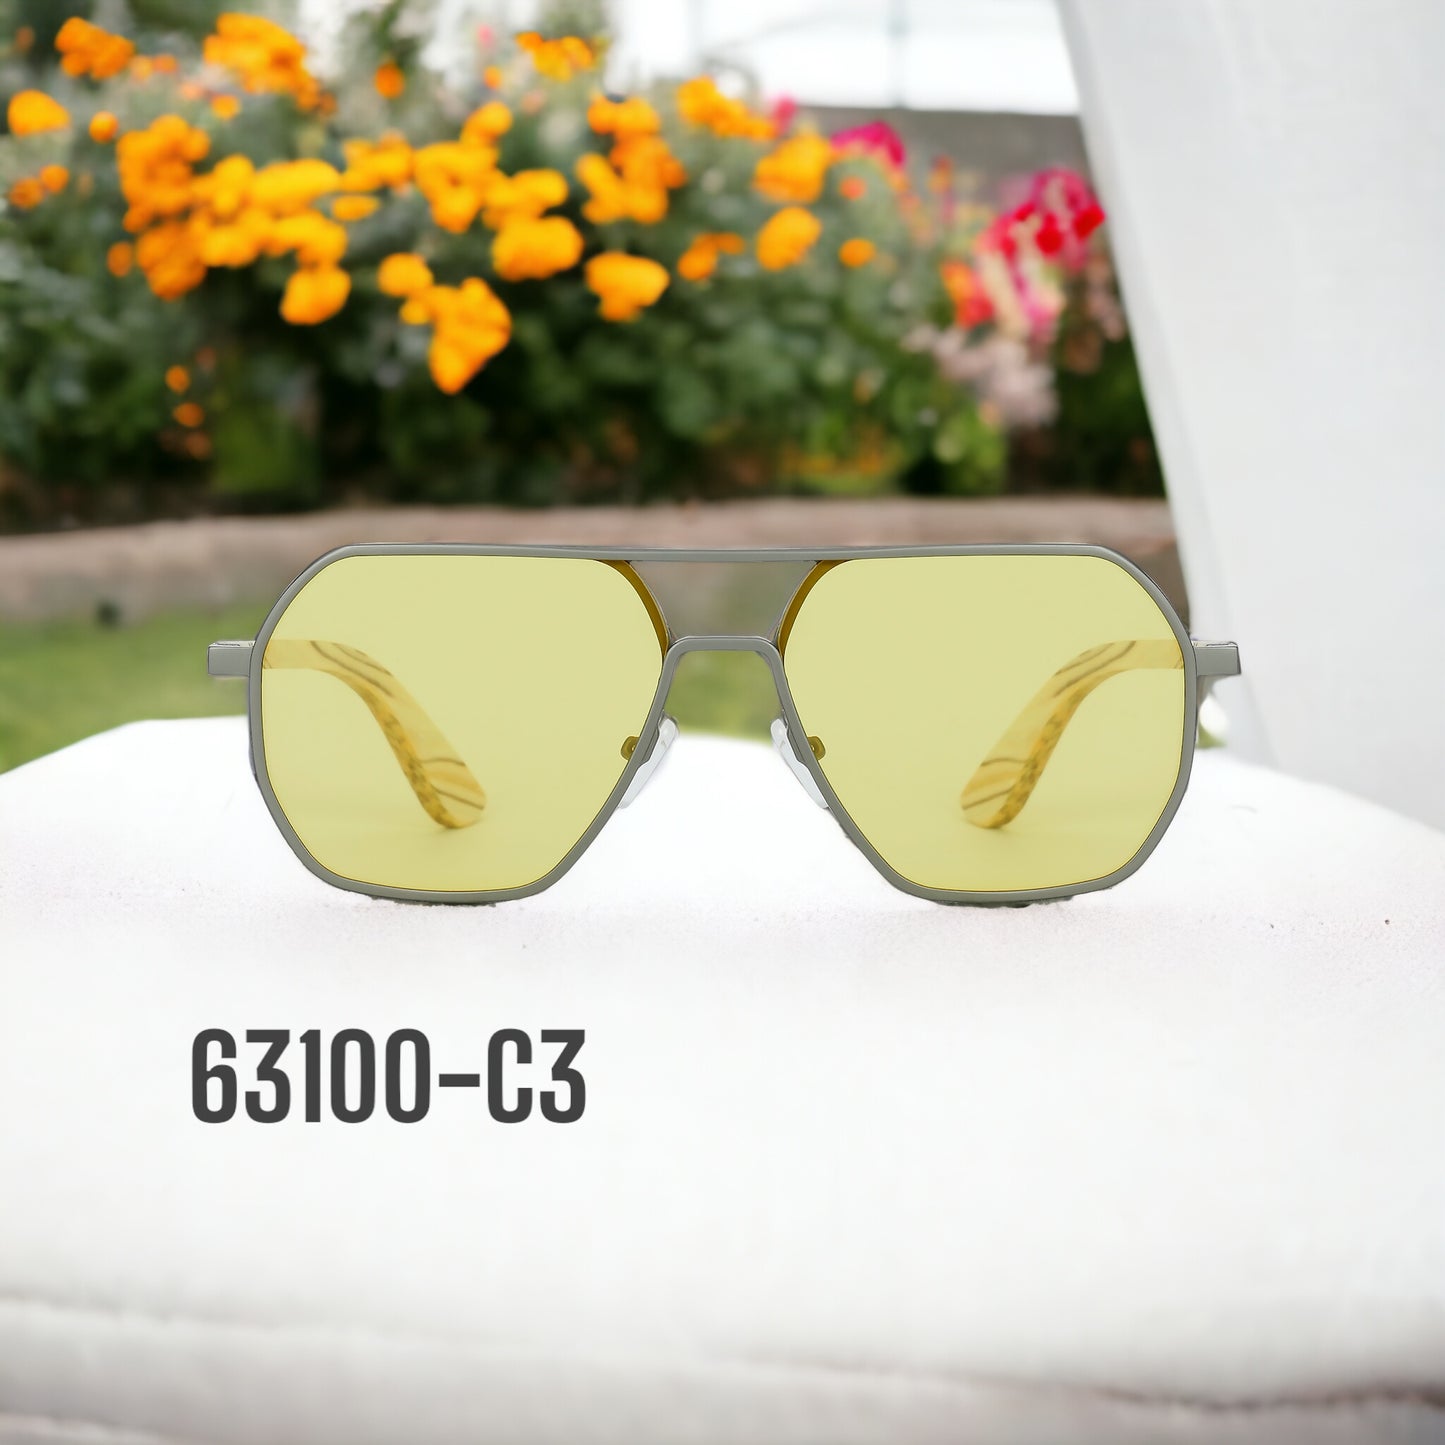 63100-C3 Stylish Sunglasses with colored Wood/Bamboo Frame UV400 Lens fit all weather